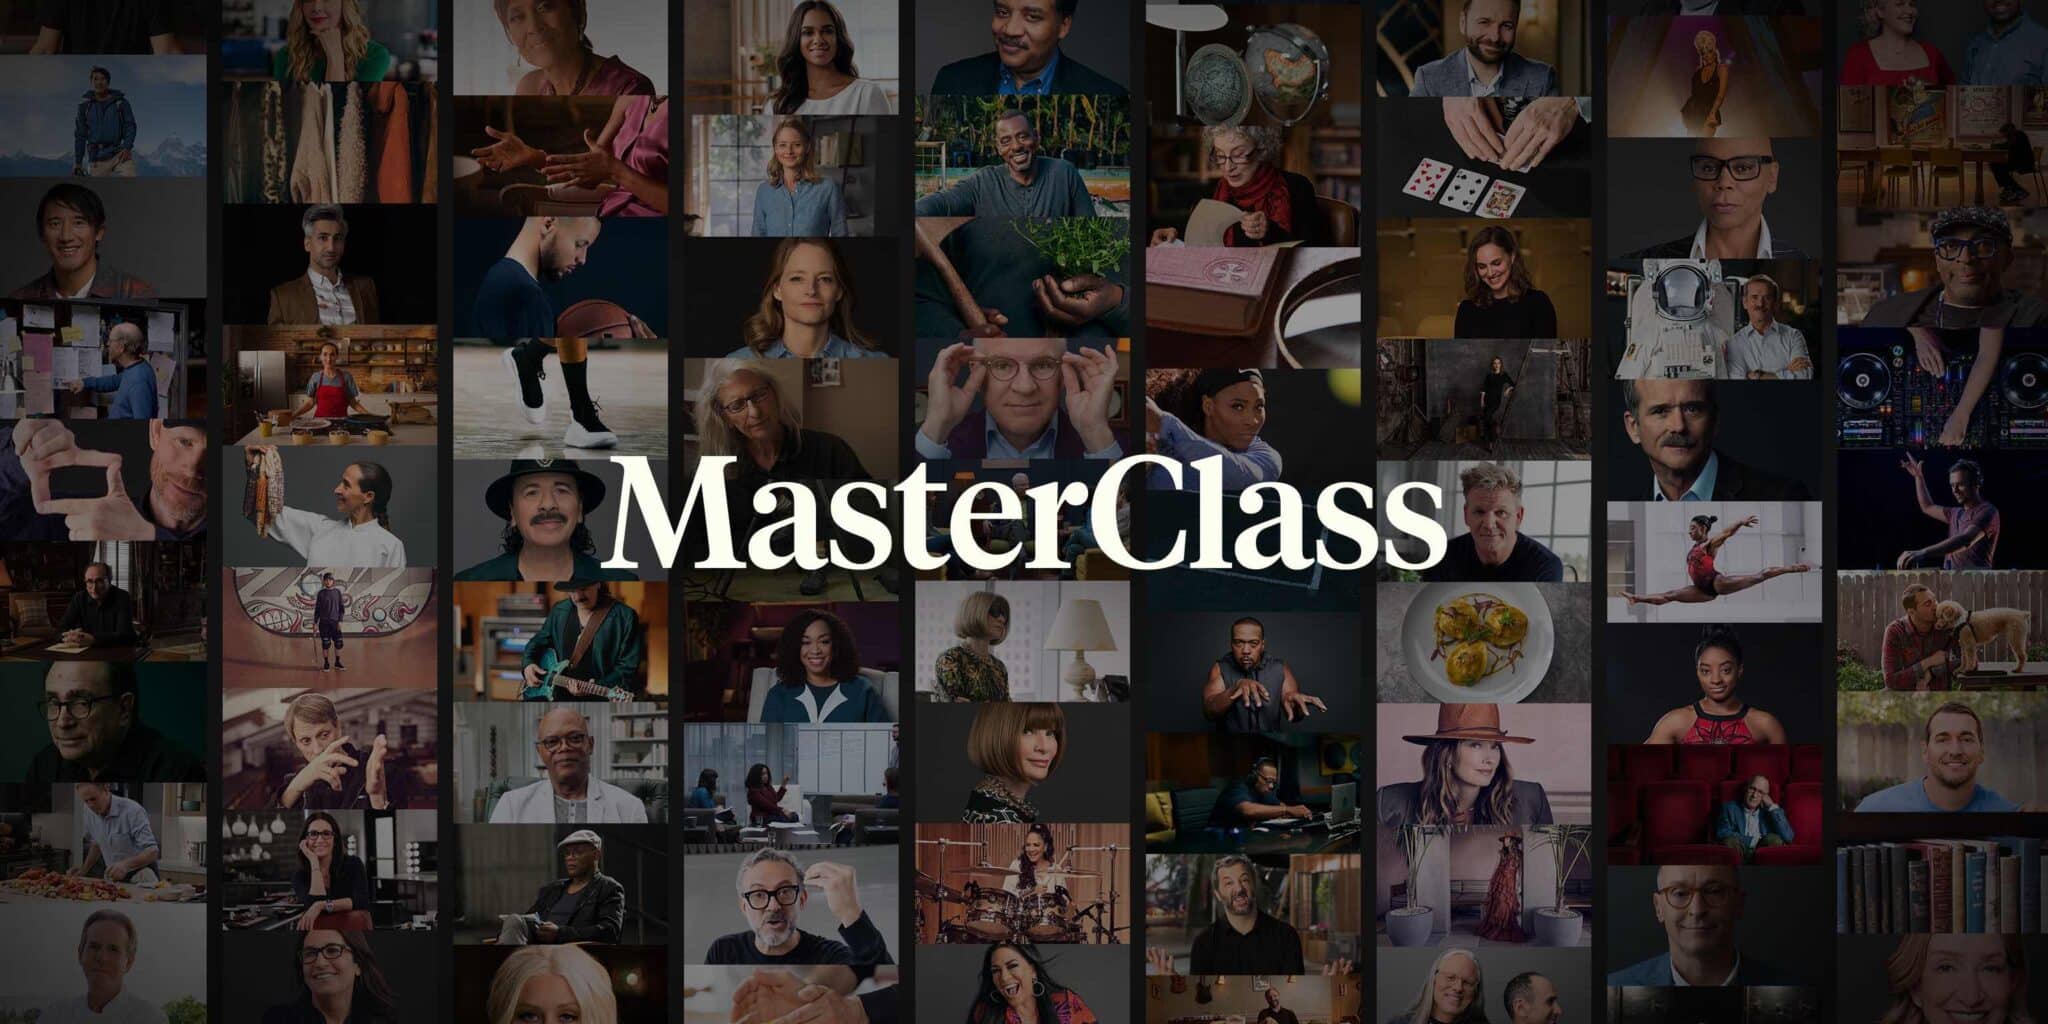 LG is giving free access to the MasterClass streaming platform